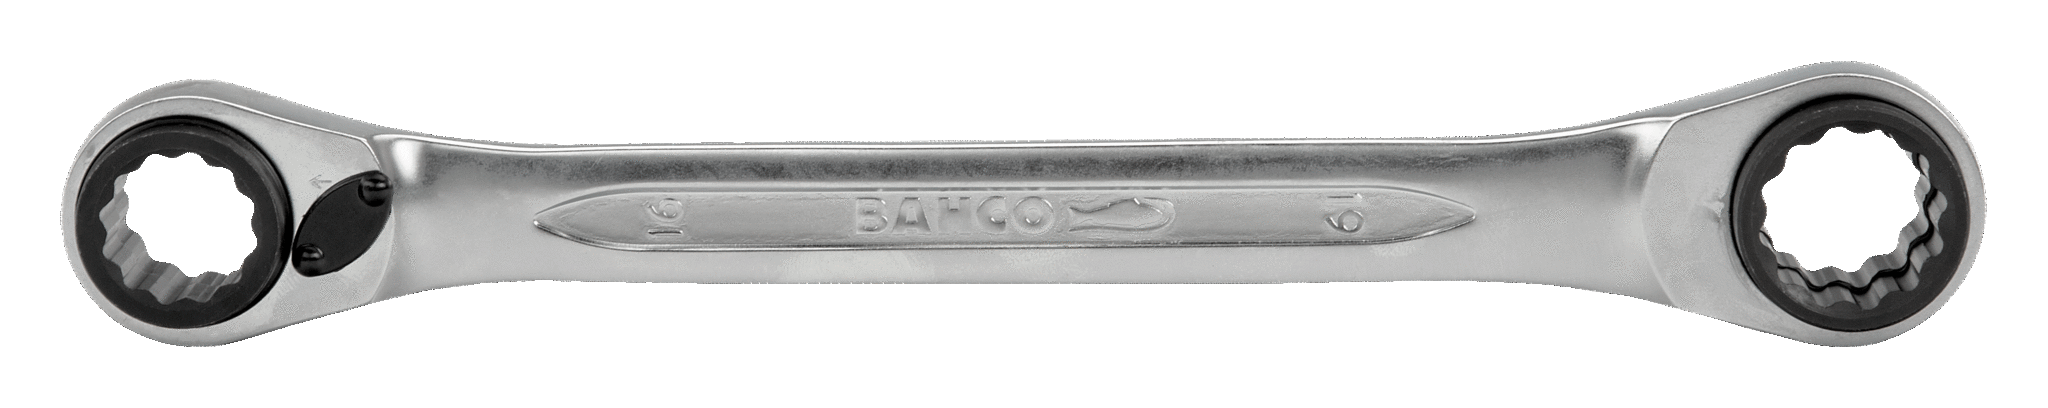 4-in-1 Ratcheting Ring Wrenches with Chrome Finish - S4RM-30-36 by Bahco